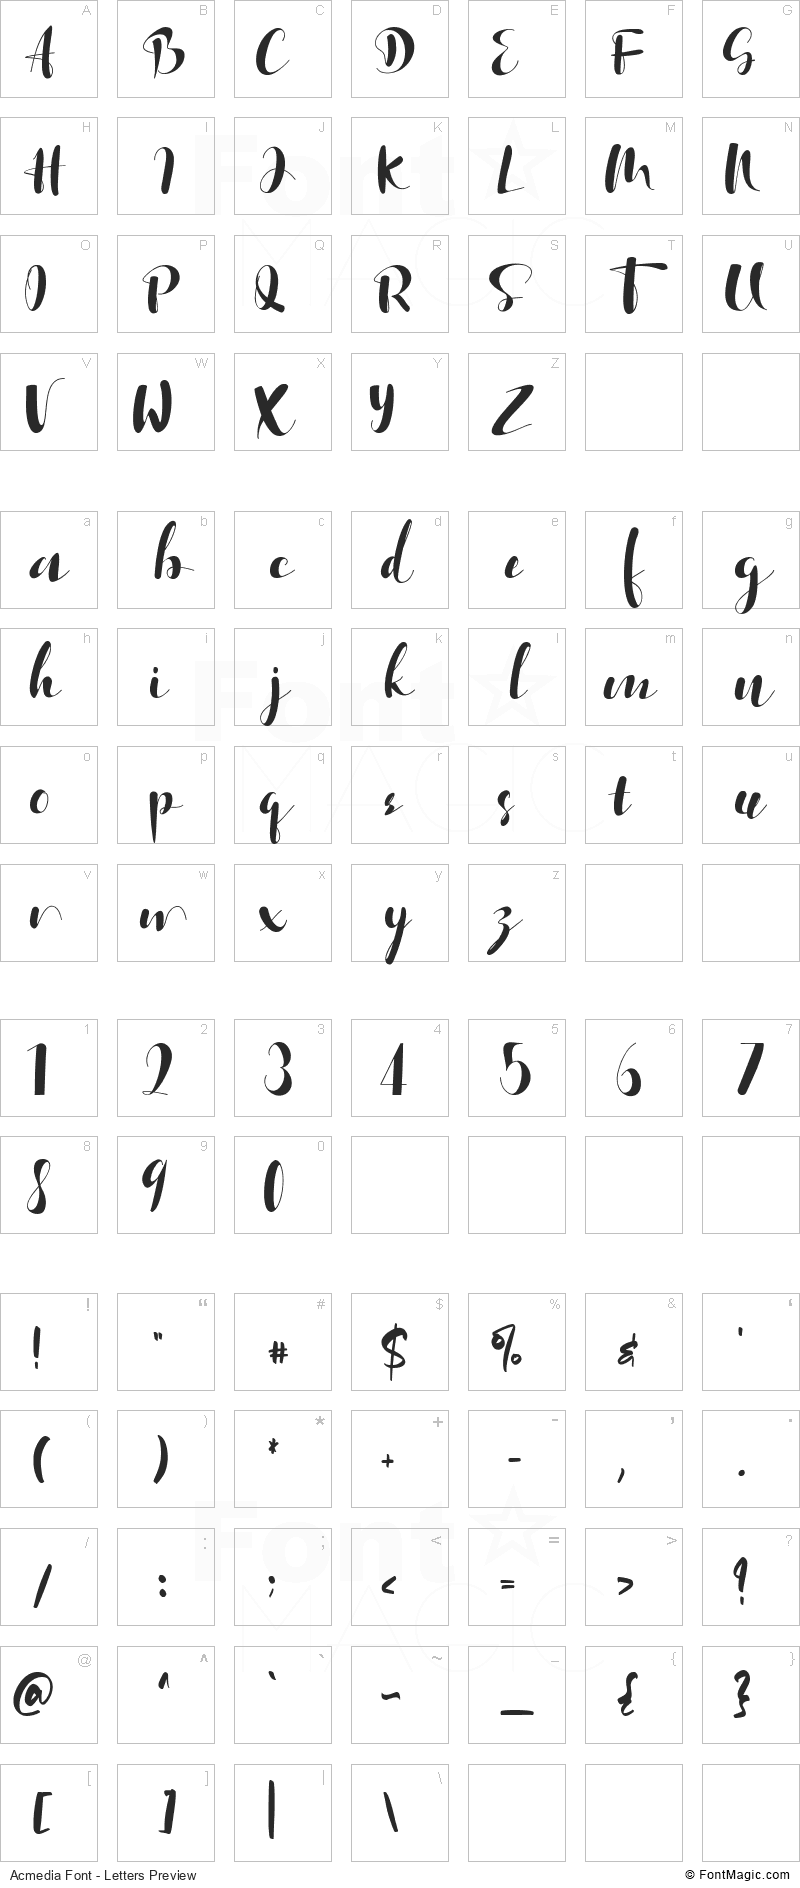 Acmedia Font - All Latters Preview Chart